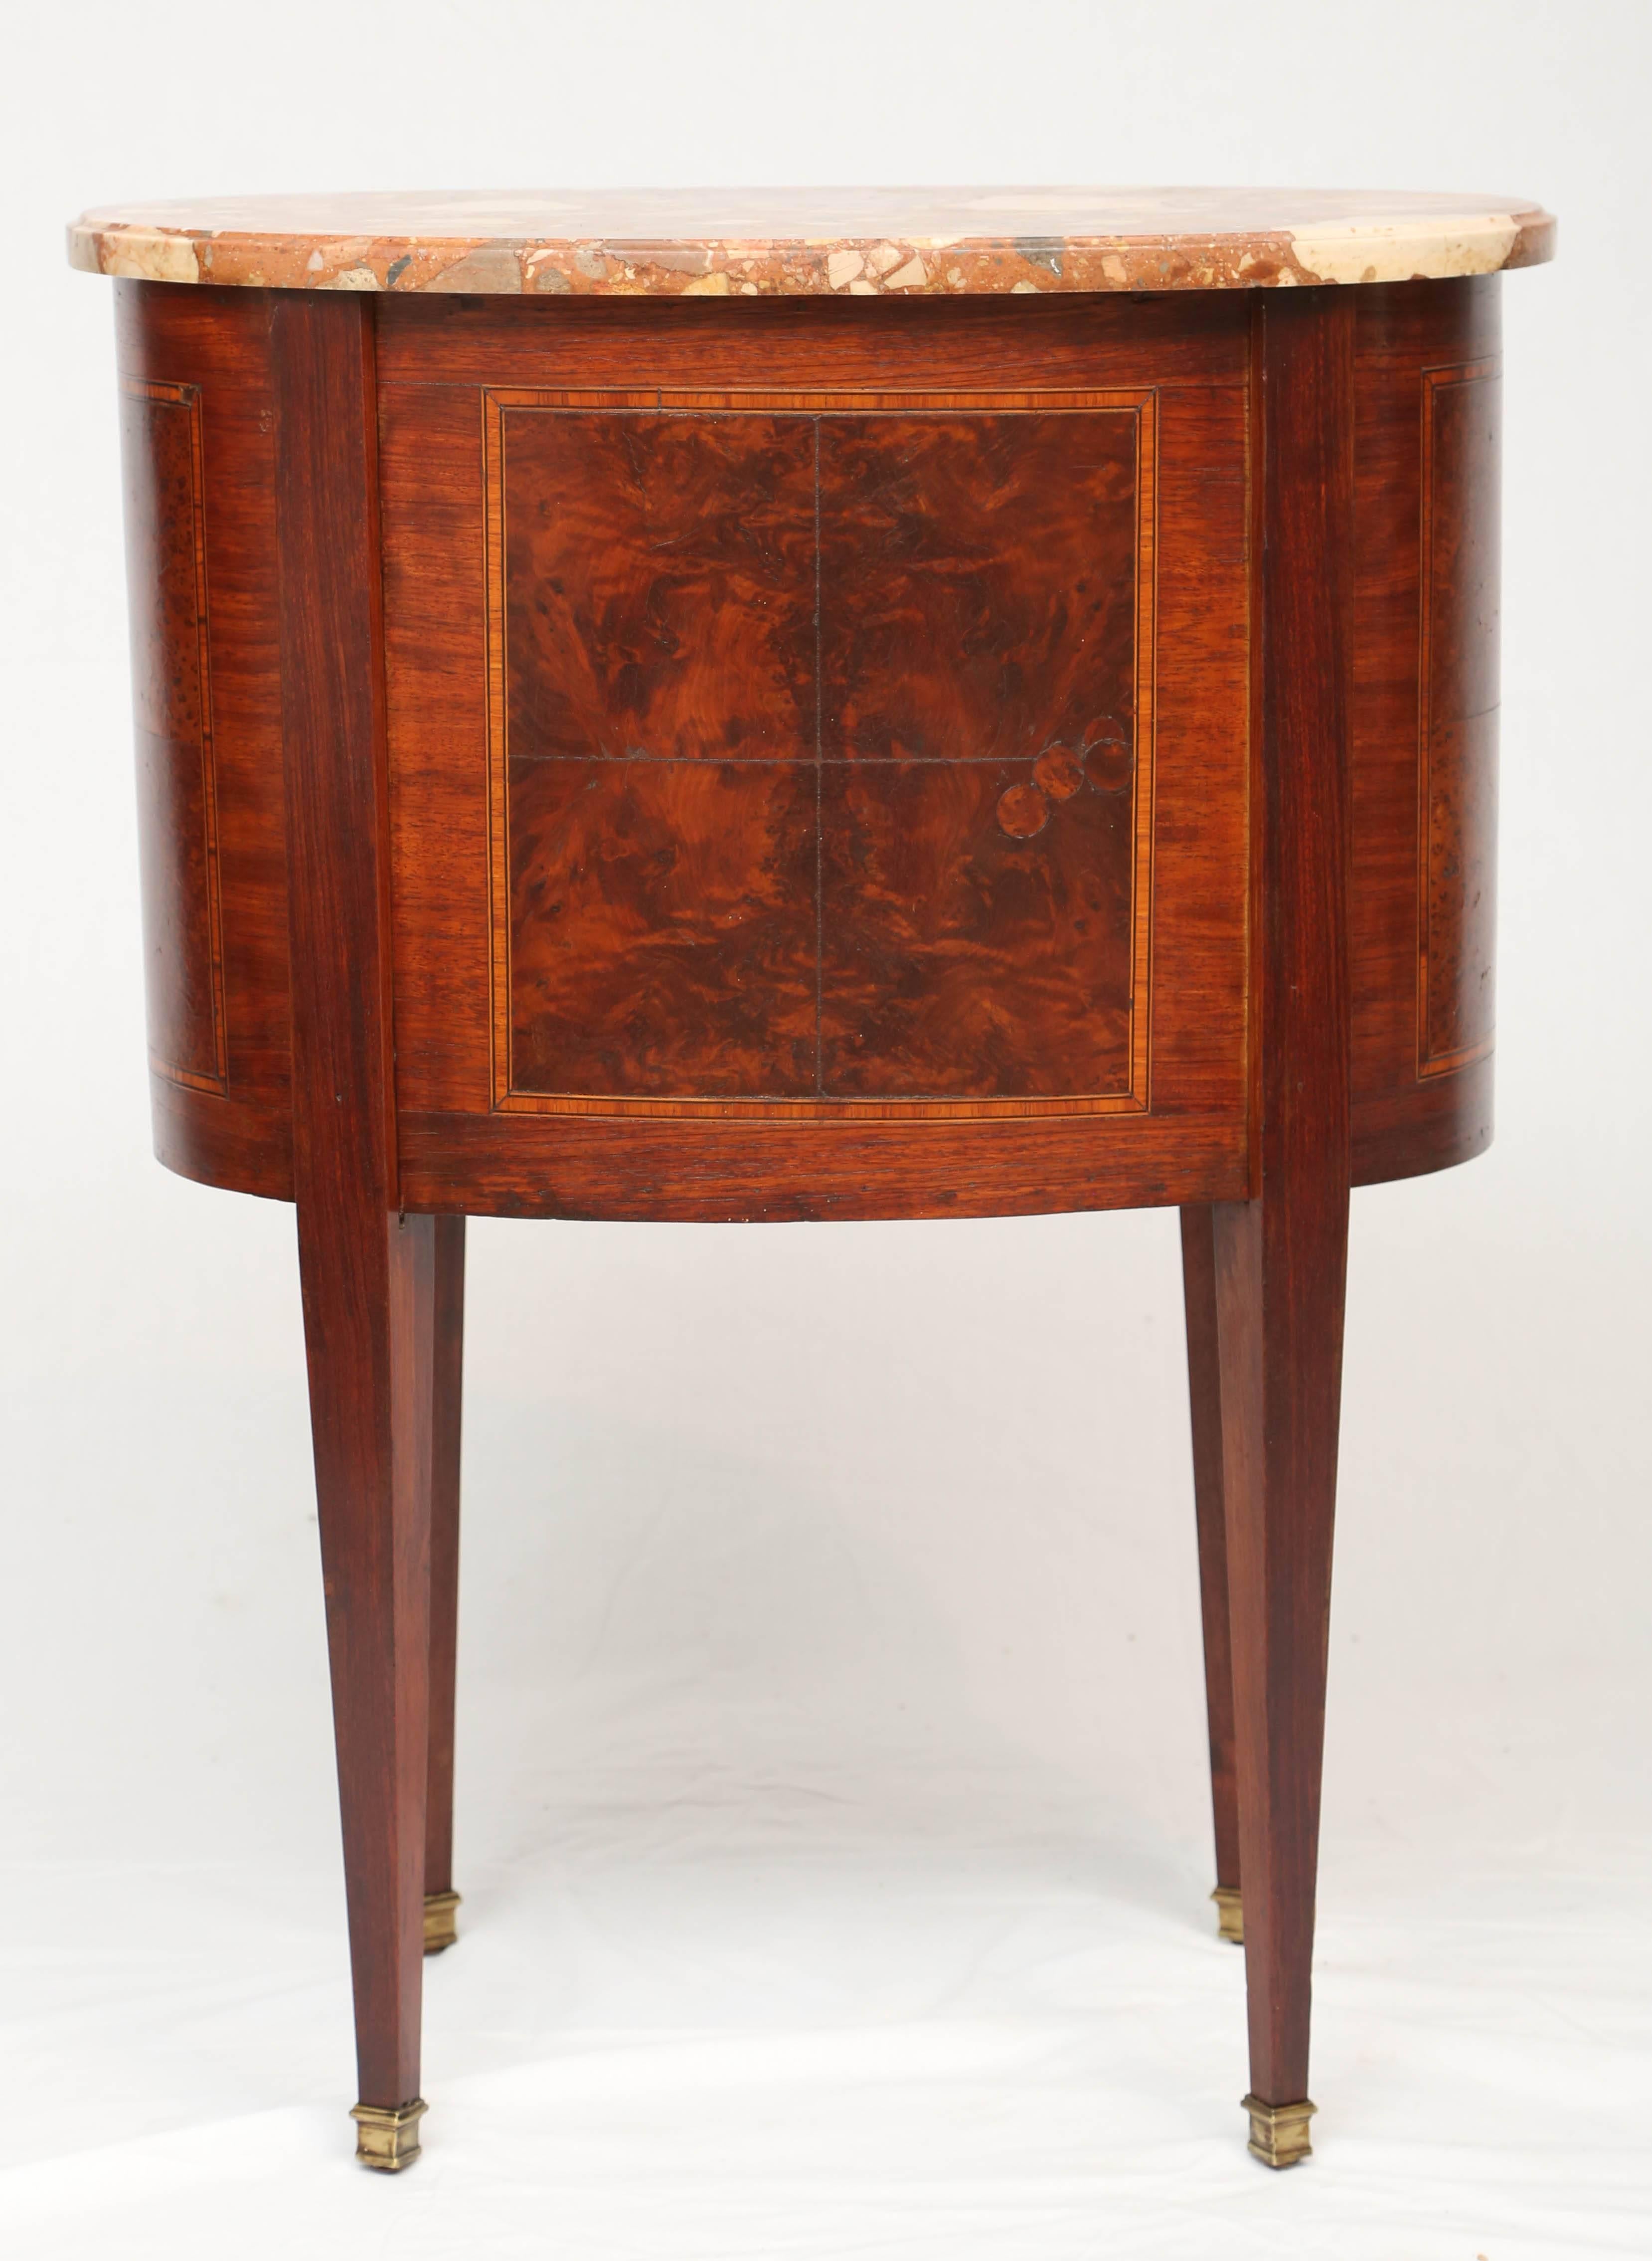 19th Century Inlaid and Parquetry French Commode with Marble Top For Sale 4